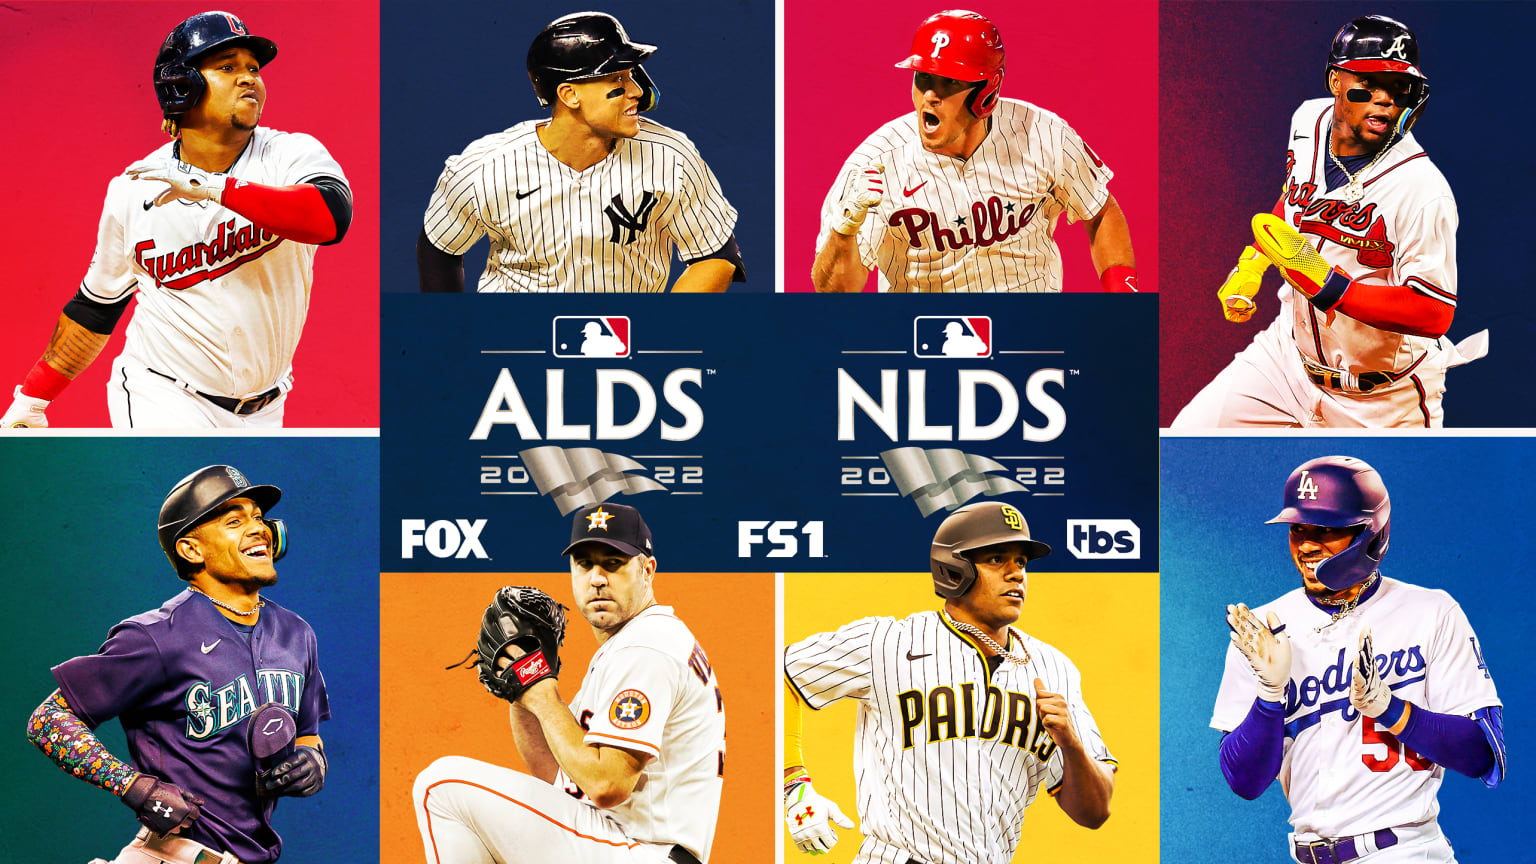 A montage shows photos of eight players with the ALDS and NLDS logos in the middle.